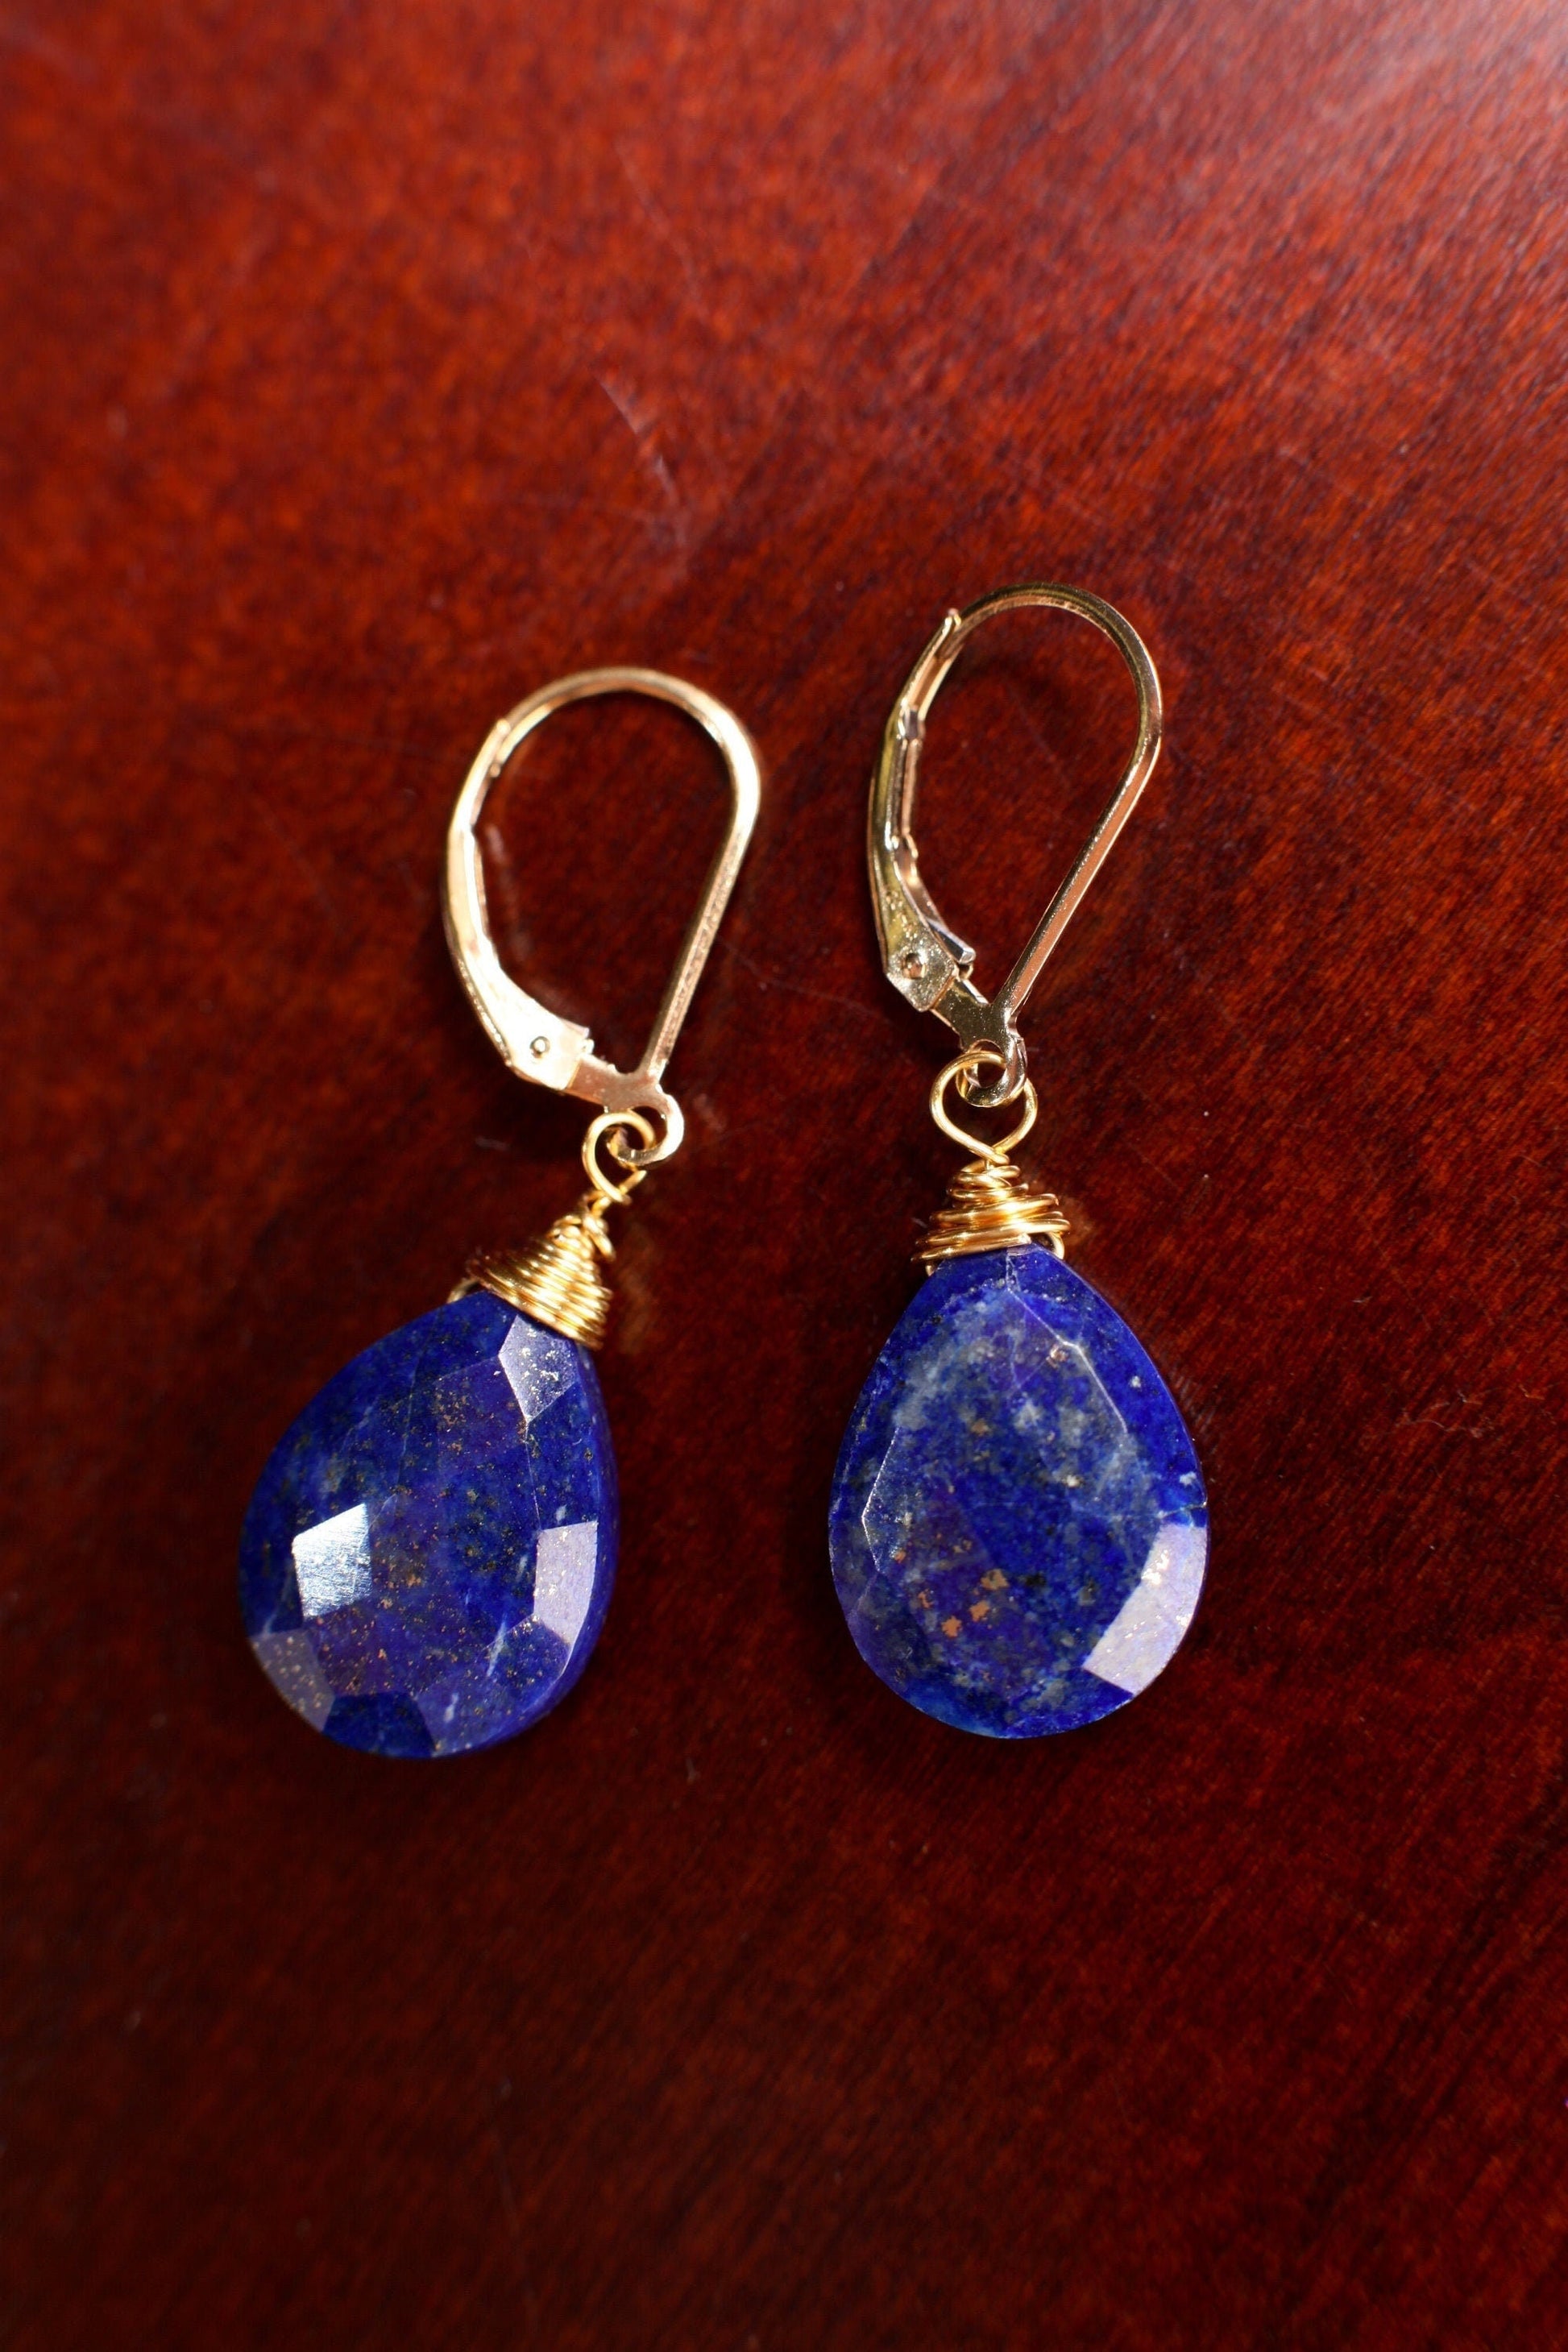 Lapis Lazuli Earrings, Natural Lapis Pear Drop 12x16mm Wire Wrapped Long Teardrop in 14K Gold Filled or 925 Sterling Silver Leverback